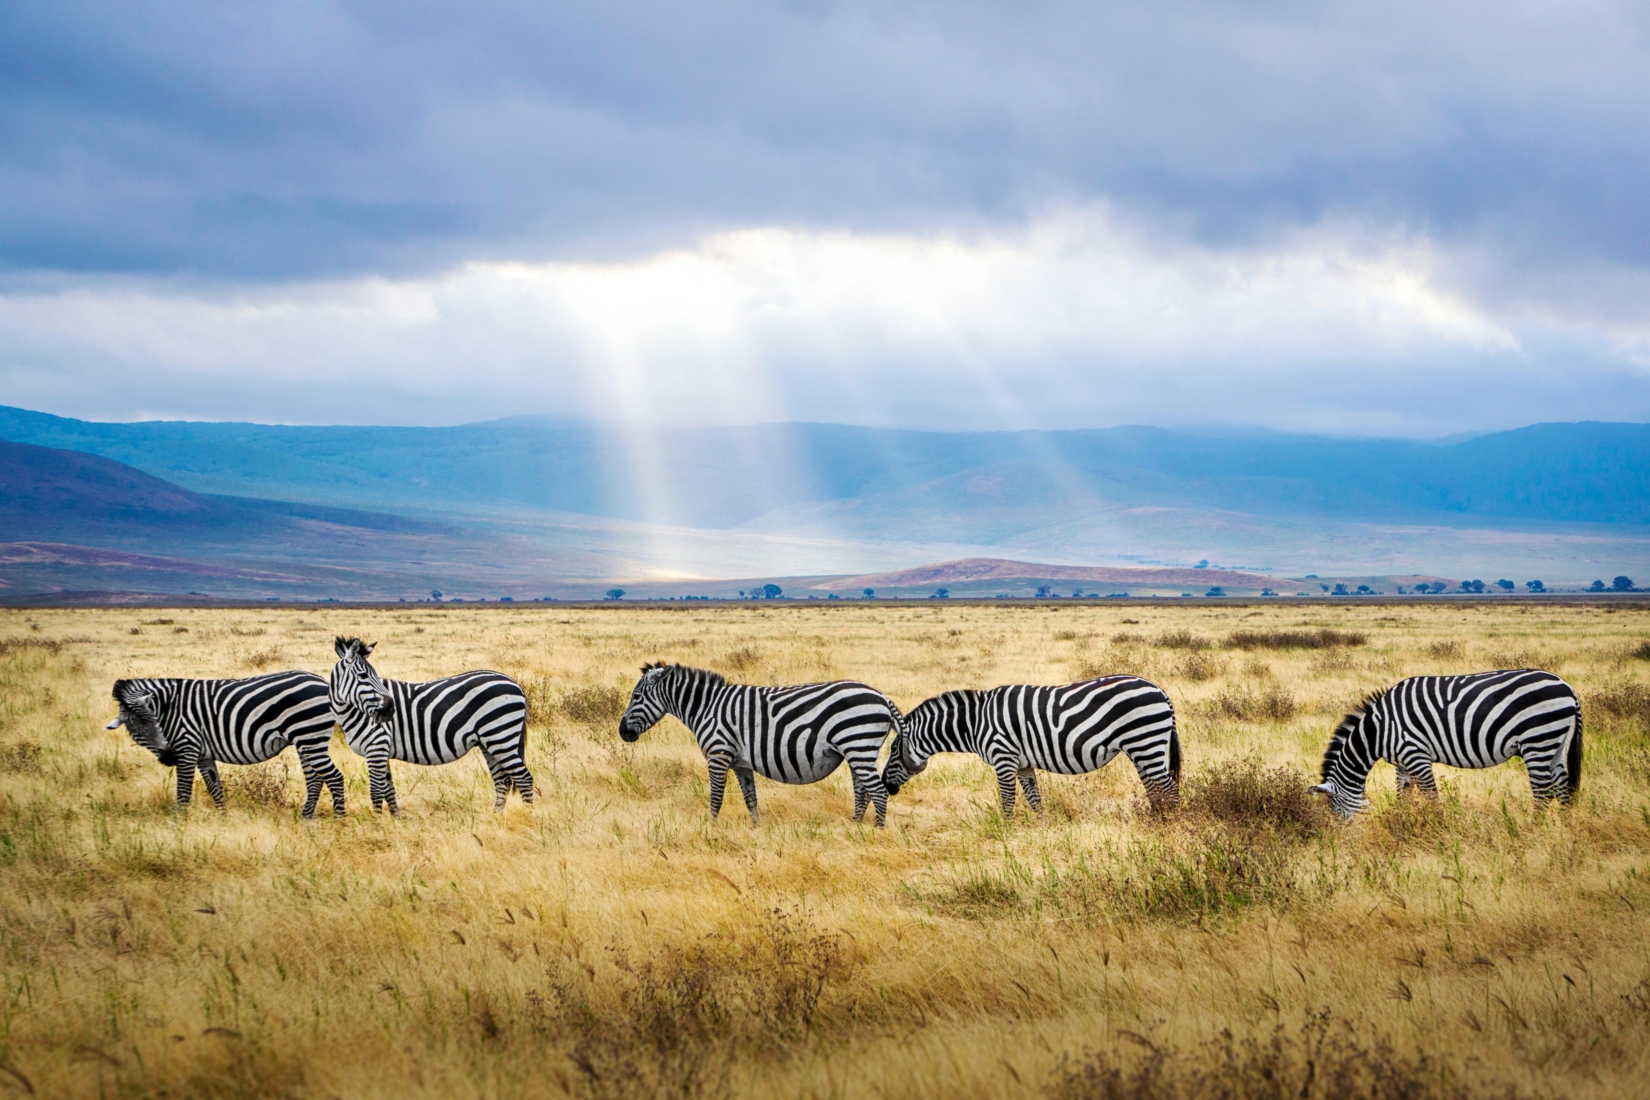 Five zebras in grazing in a grass field during the daytime